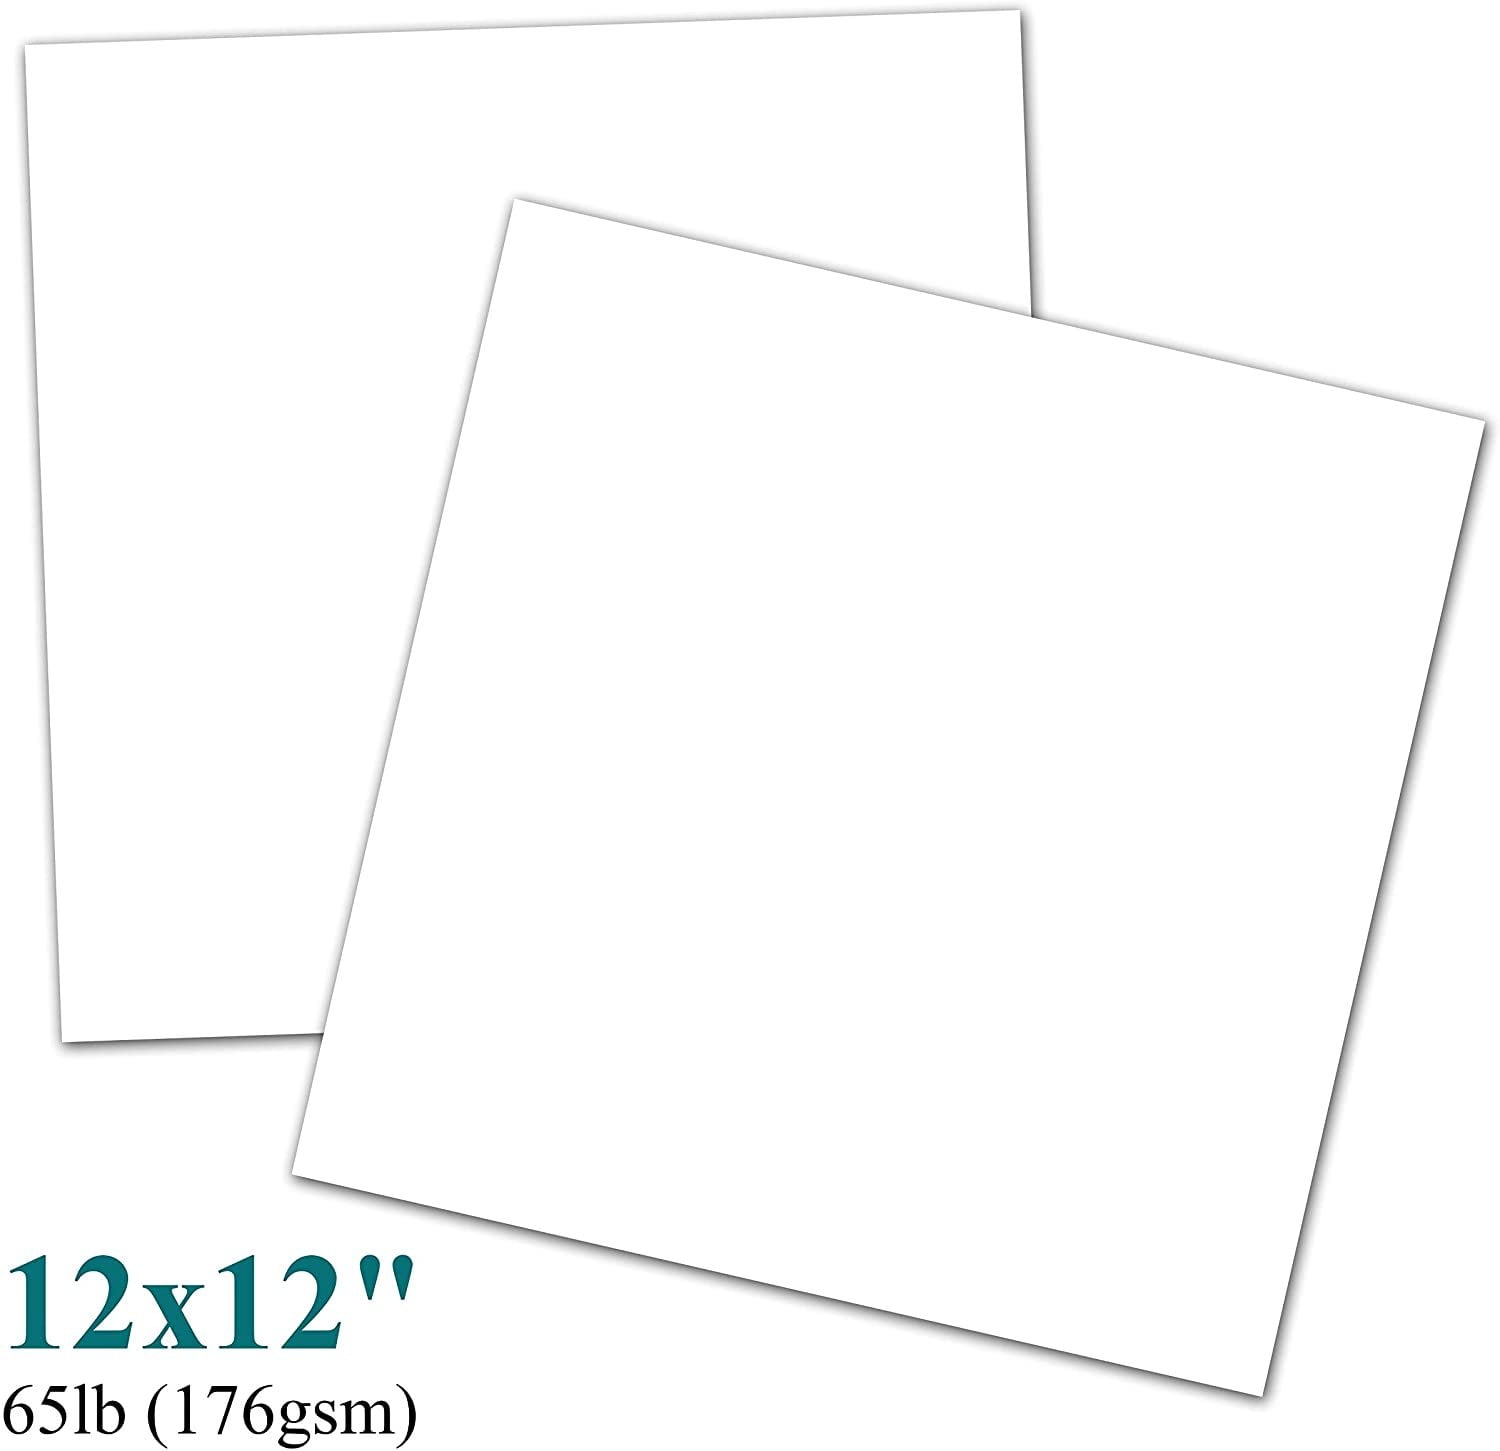 25 Sheets Black Cardstock 12 x 12 inch 65Lb Cover 